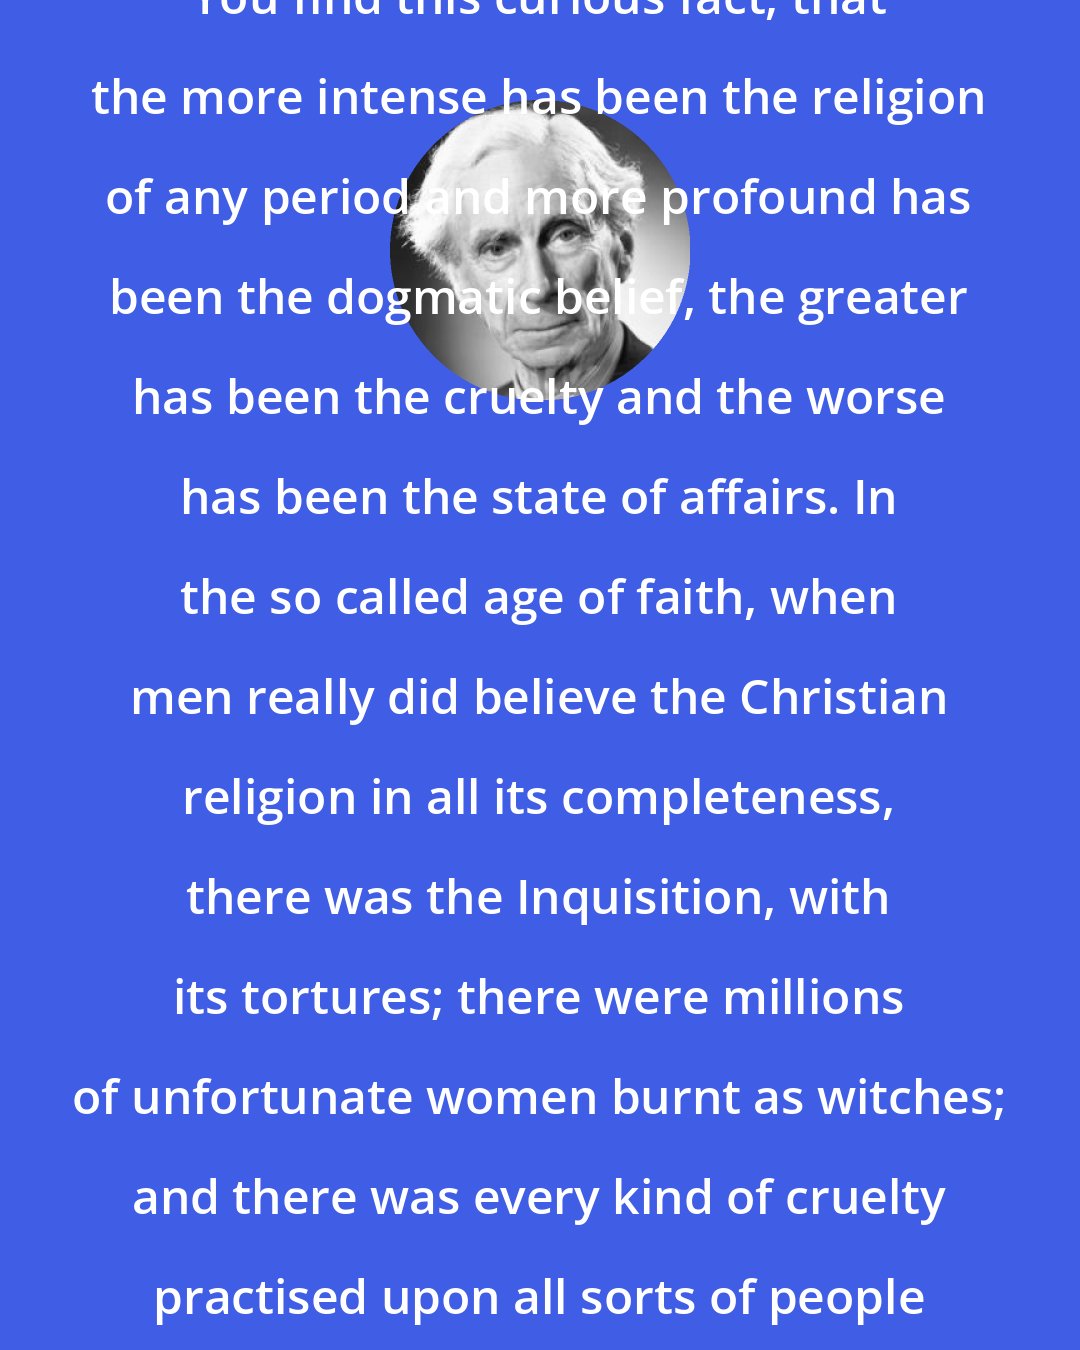 Bertrand Russell: You find this curious fact, that the more intense has been the religion of any period and more profound has been the dogmatic belief, the greater has been the cruelty and the worse has been the state of affairs. In the so called age of faith, when men really did believe the Christian religion in all its completeness, there was the Inquisition, with its tortures; there were millions of unfortunate women burnt as witches; and there was every kind of cruelty practised upon all sorts of people in the name of religion.